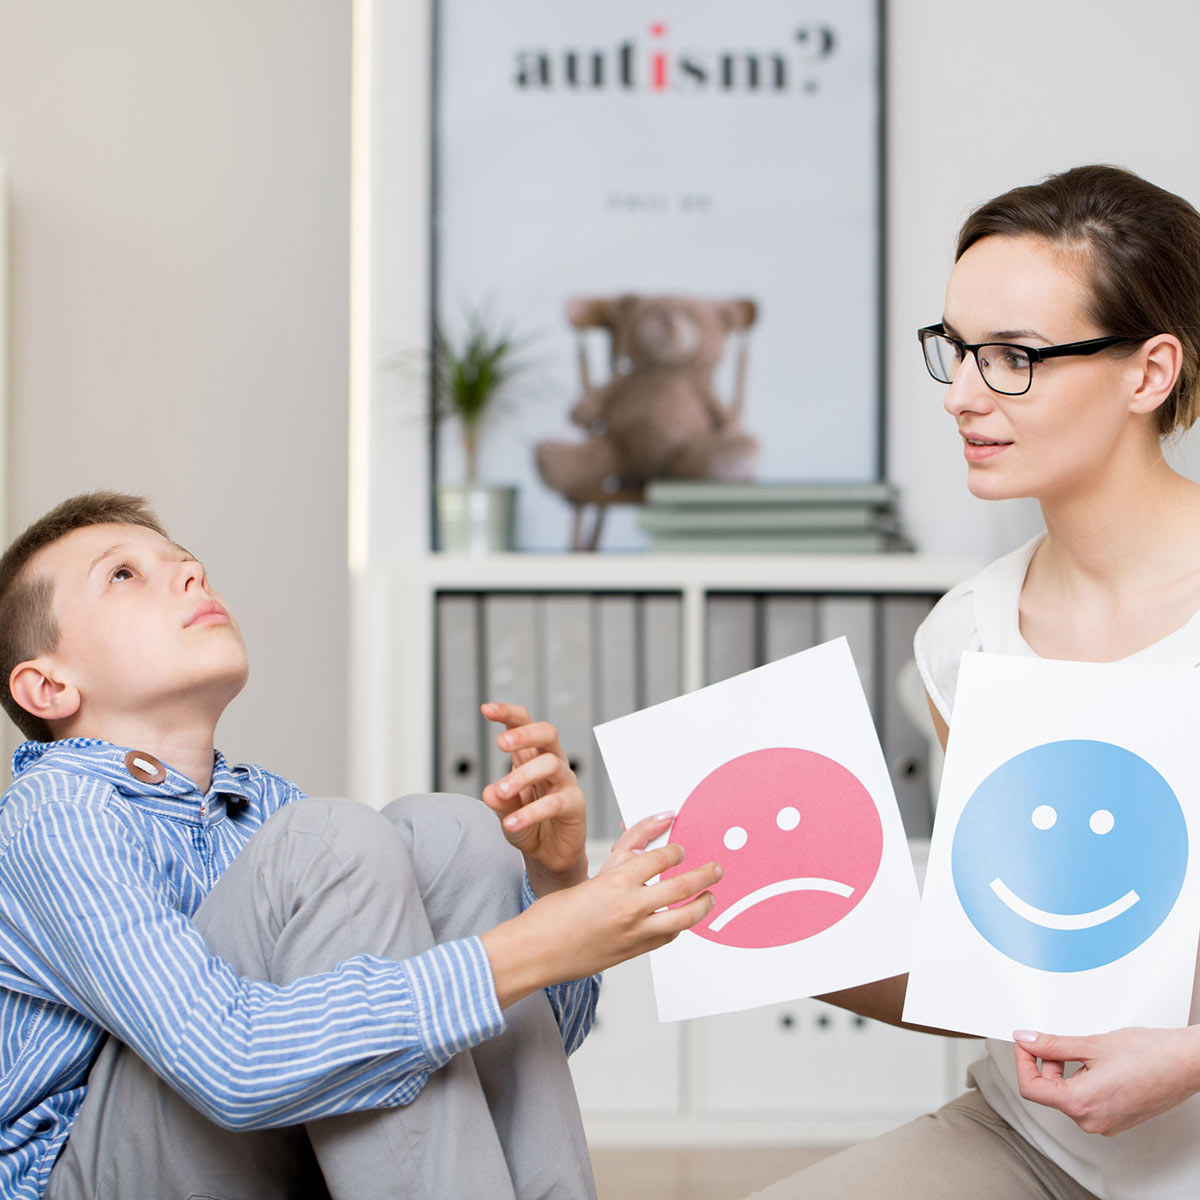 Behavioral therapist working with autistic student